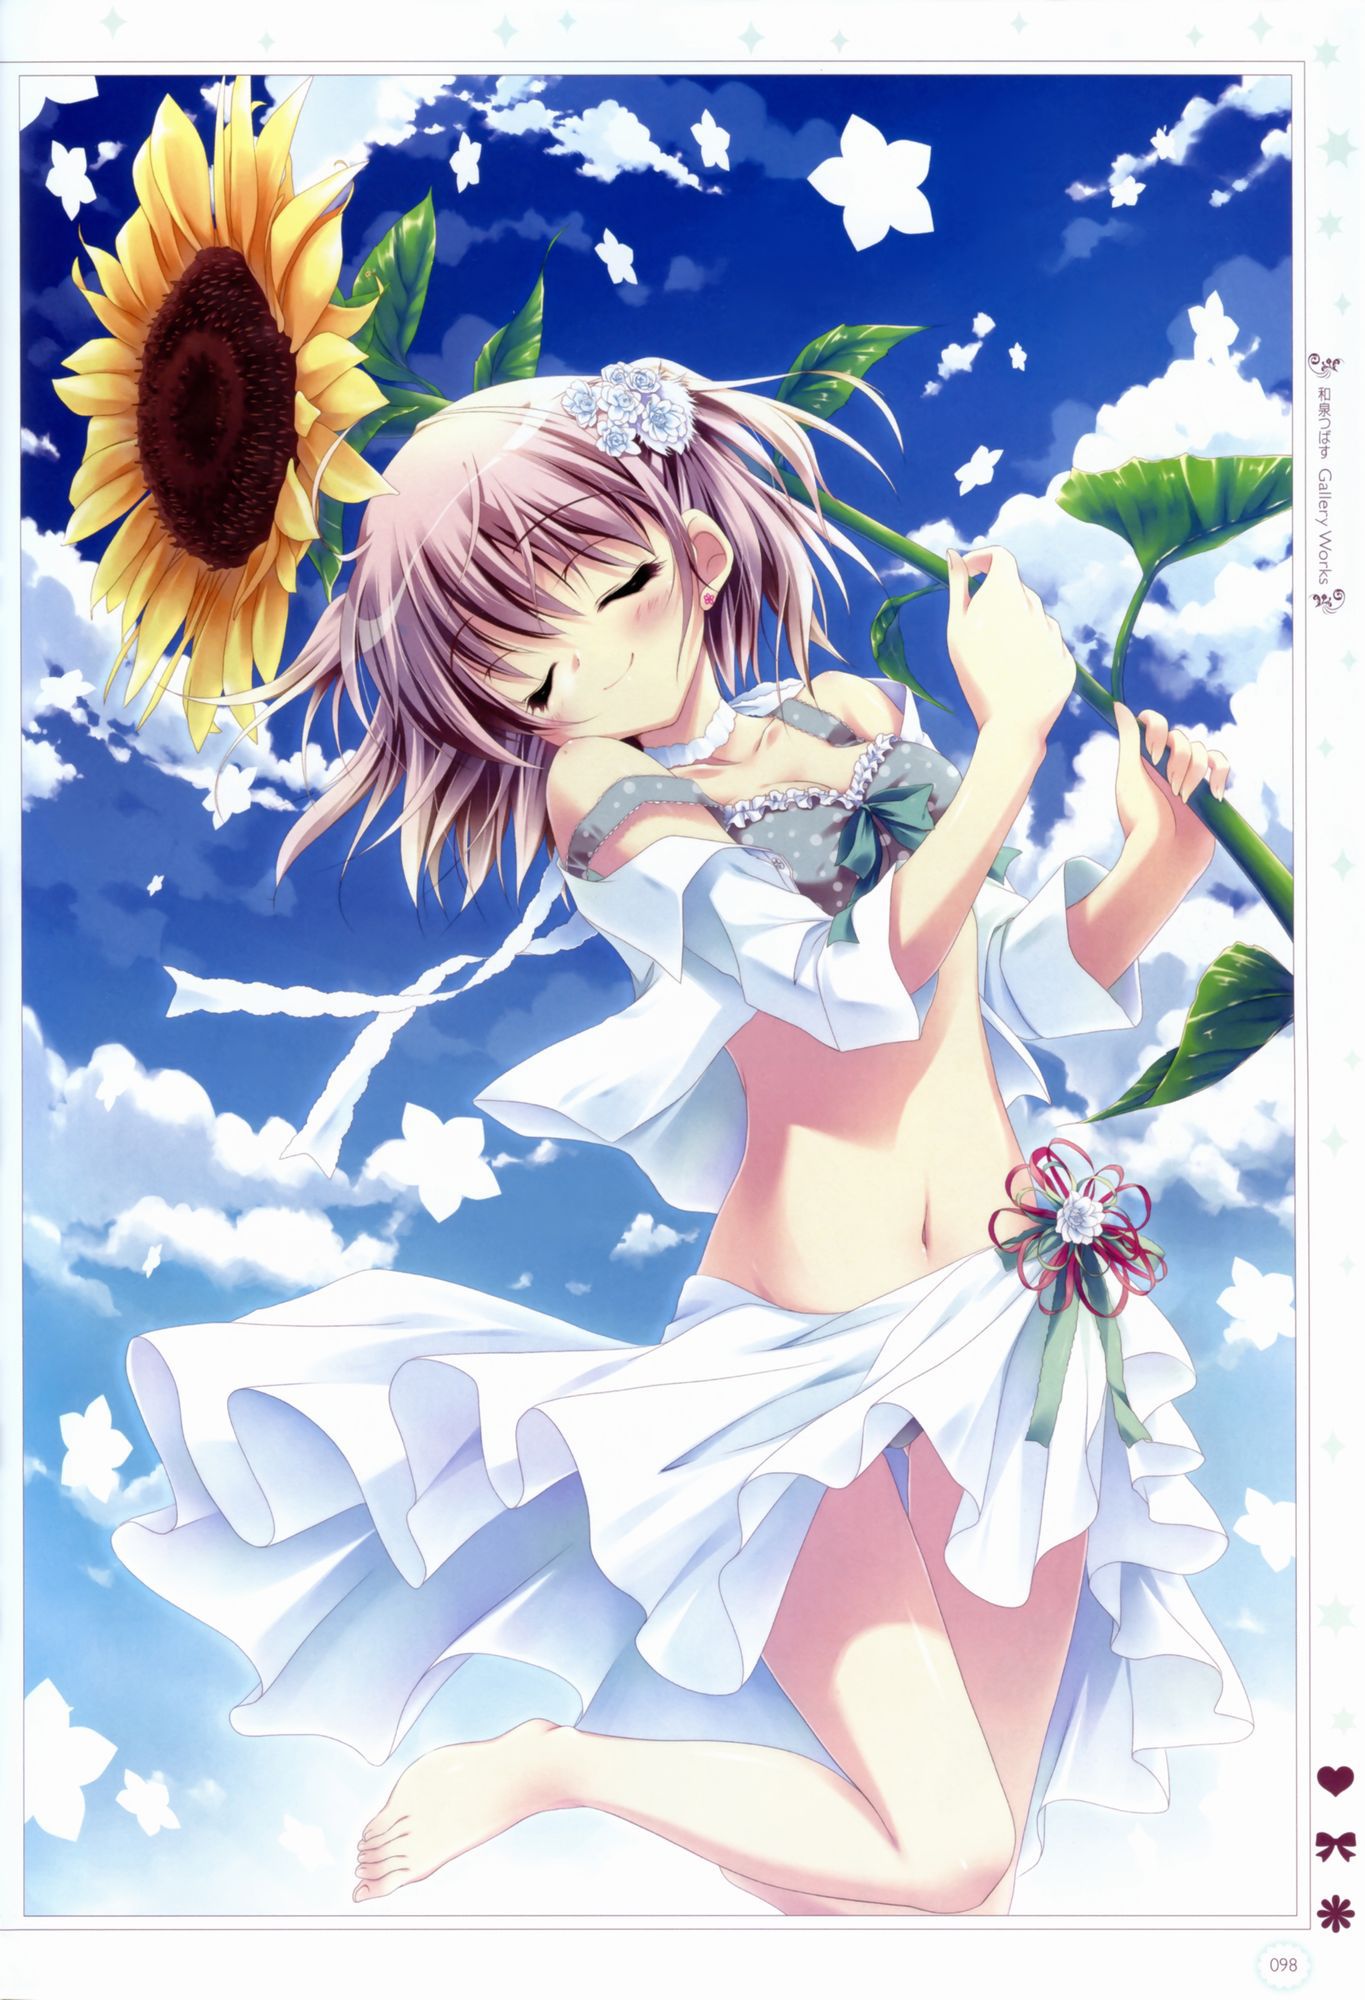 [Secondary, ZIP] summer 2: girl with a sunflower or image summary 43